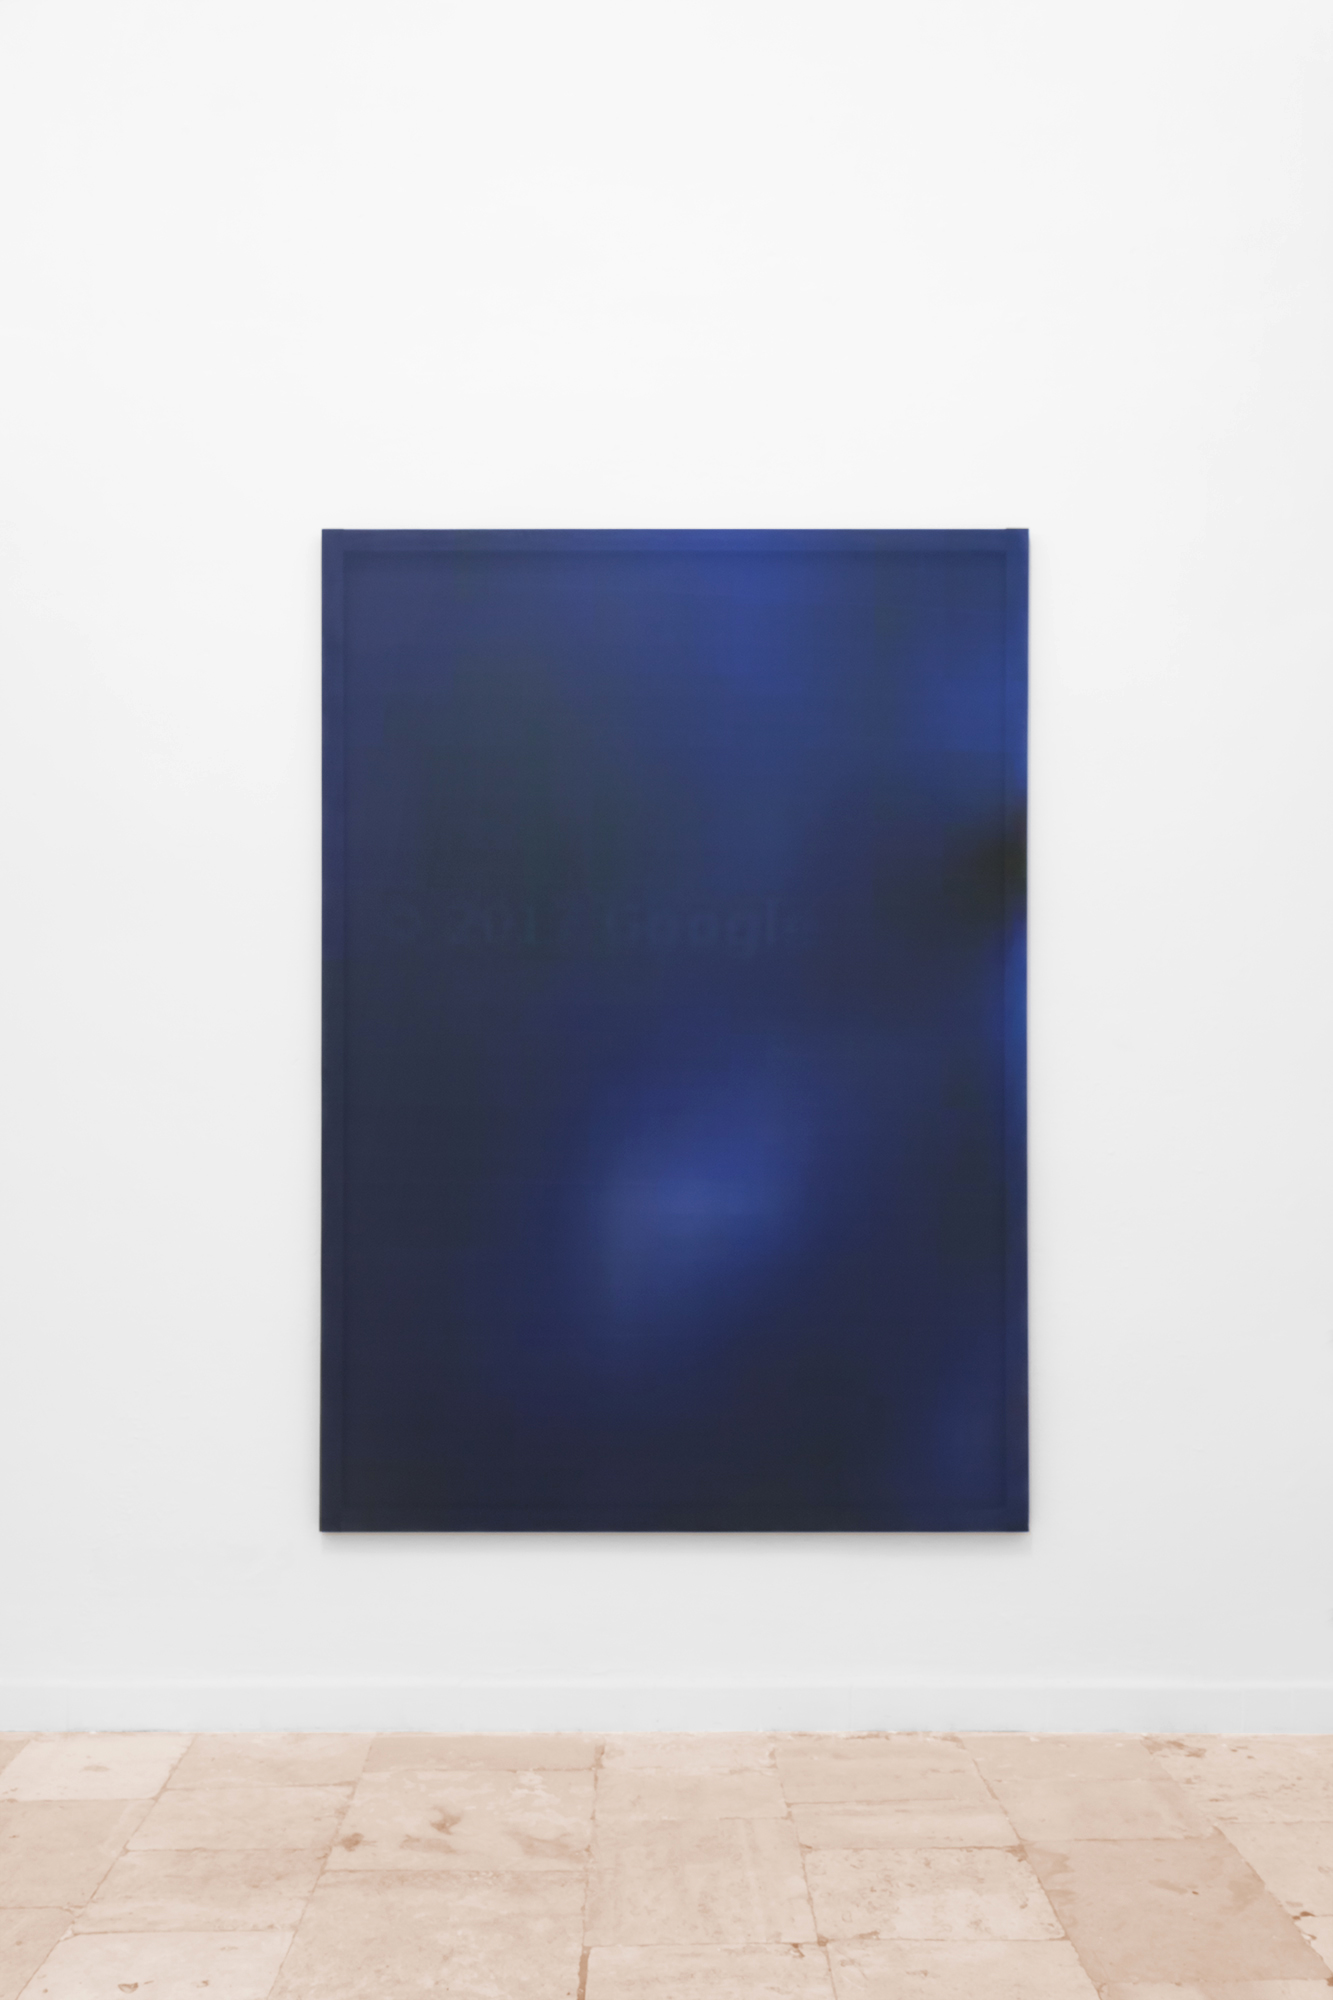 Maurizio Viceré, kh-(31) Black and blue, Calendered sublimation ink print on windproof nautical fabric, stretcher. 170 x 150 cm. 2018